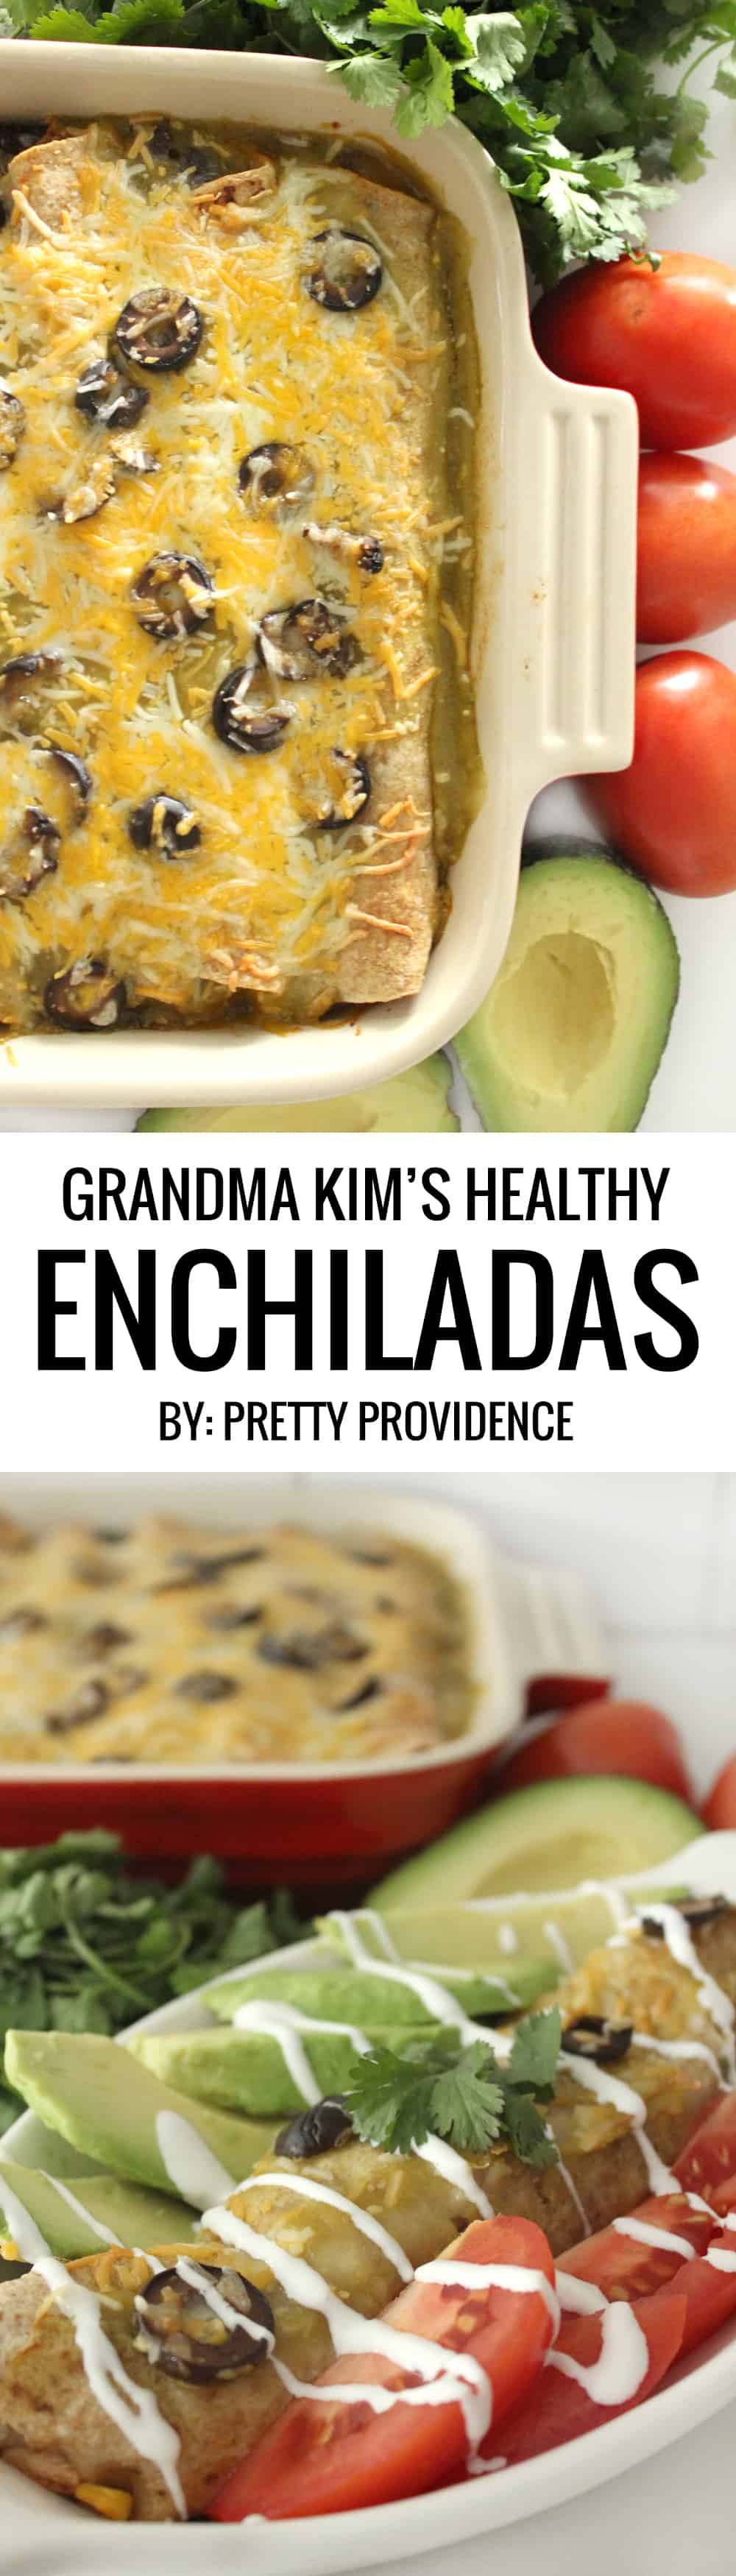 Oh. My. Gosh. These enchiladas are beyond good! They don't even taste healthy but they are totally guilt free! A new family favorite, for sure! 